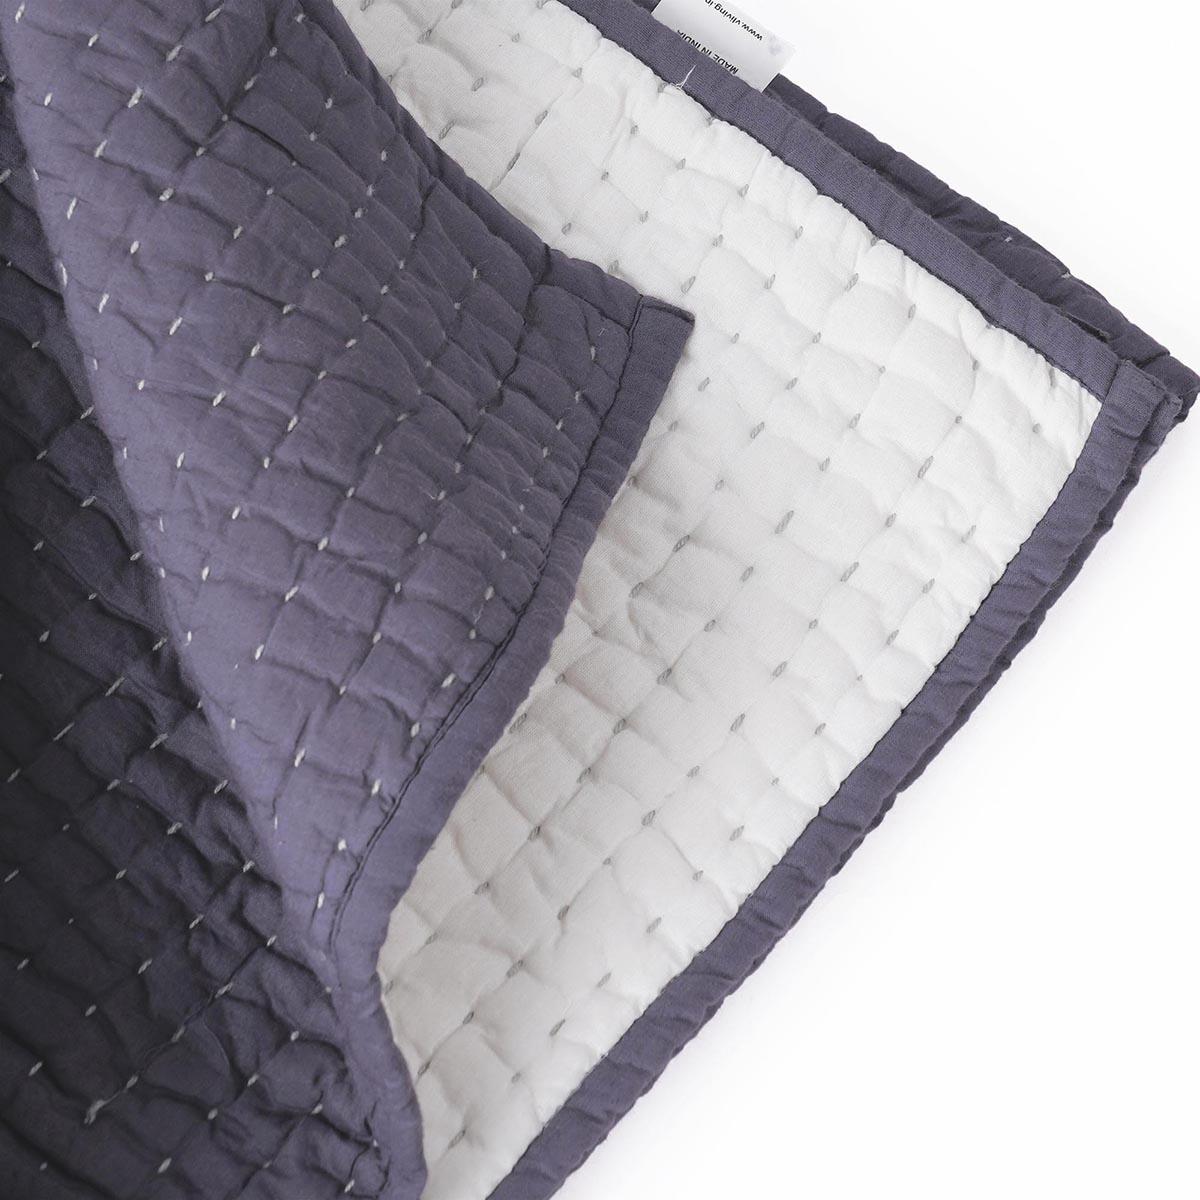 Lavender hand quilted cotton Throw blanket, classic stripe pattern quilting, 50X60 inches